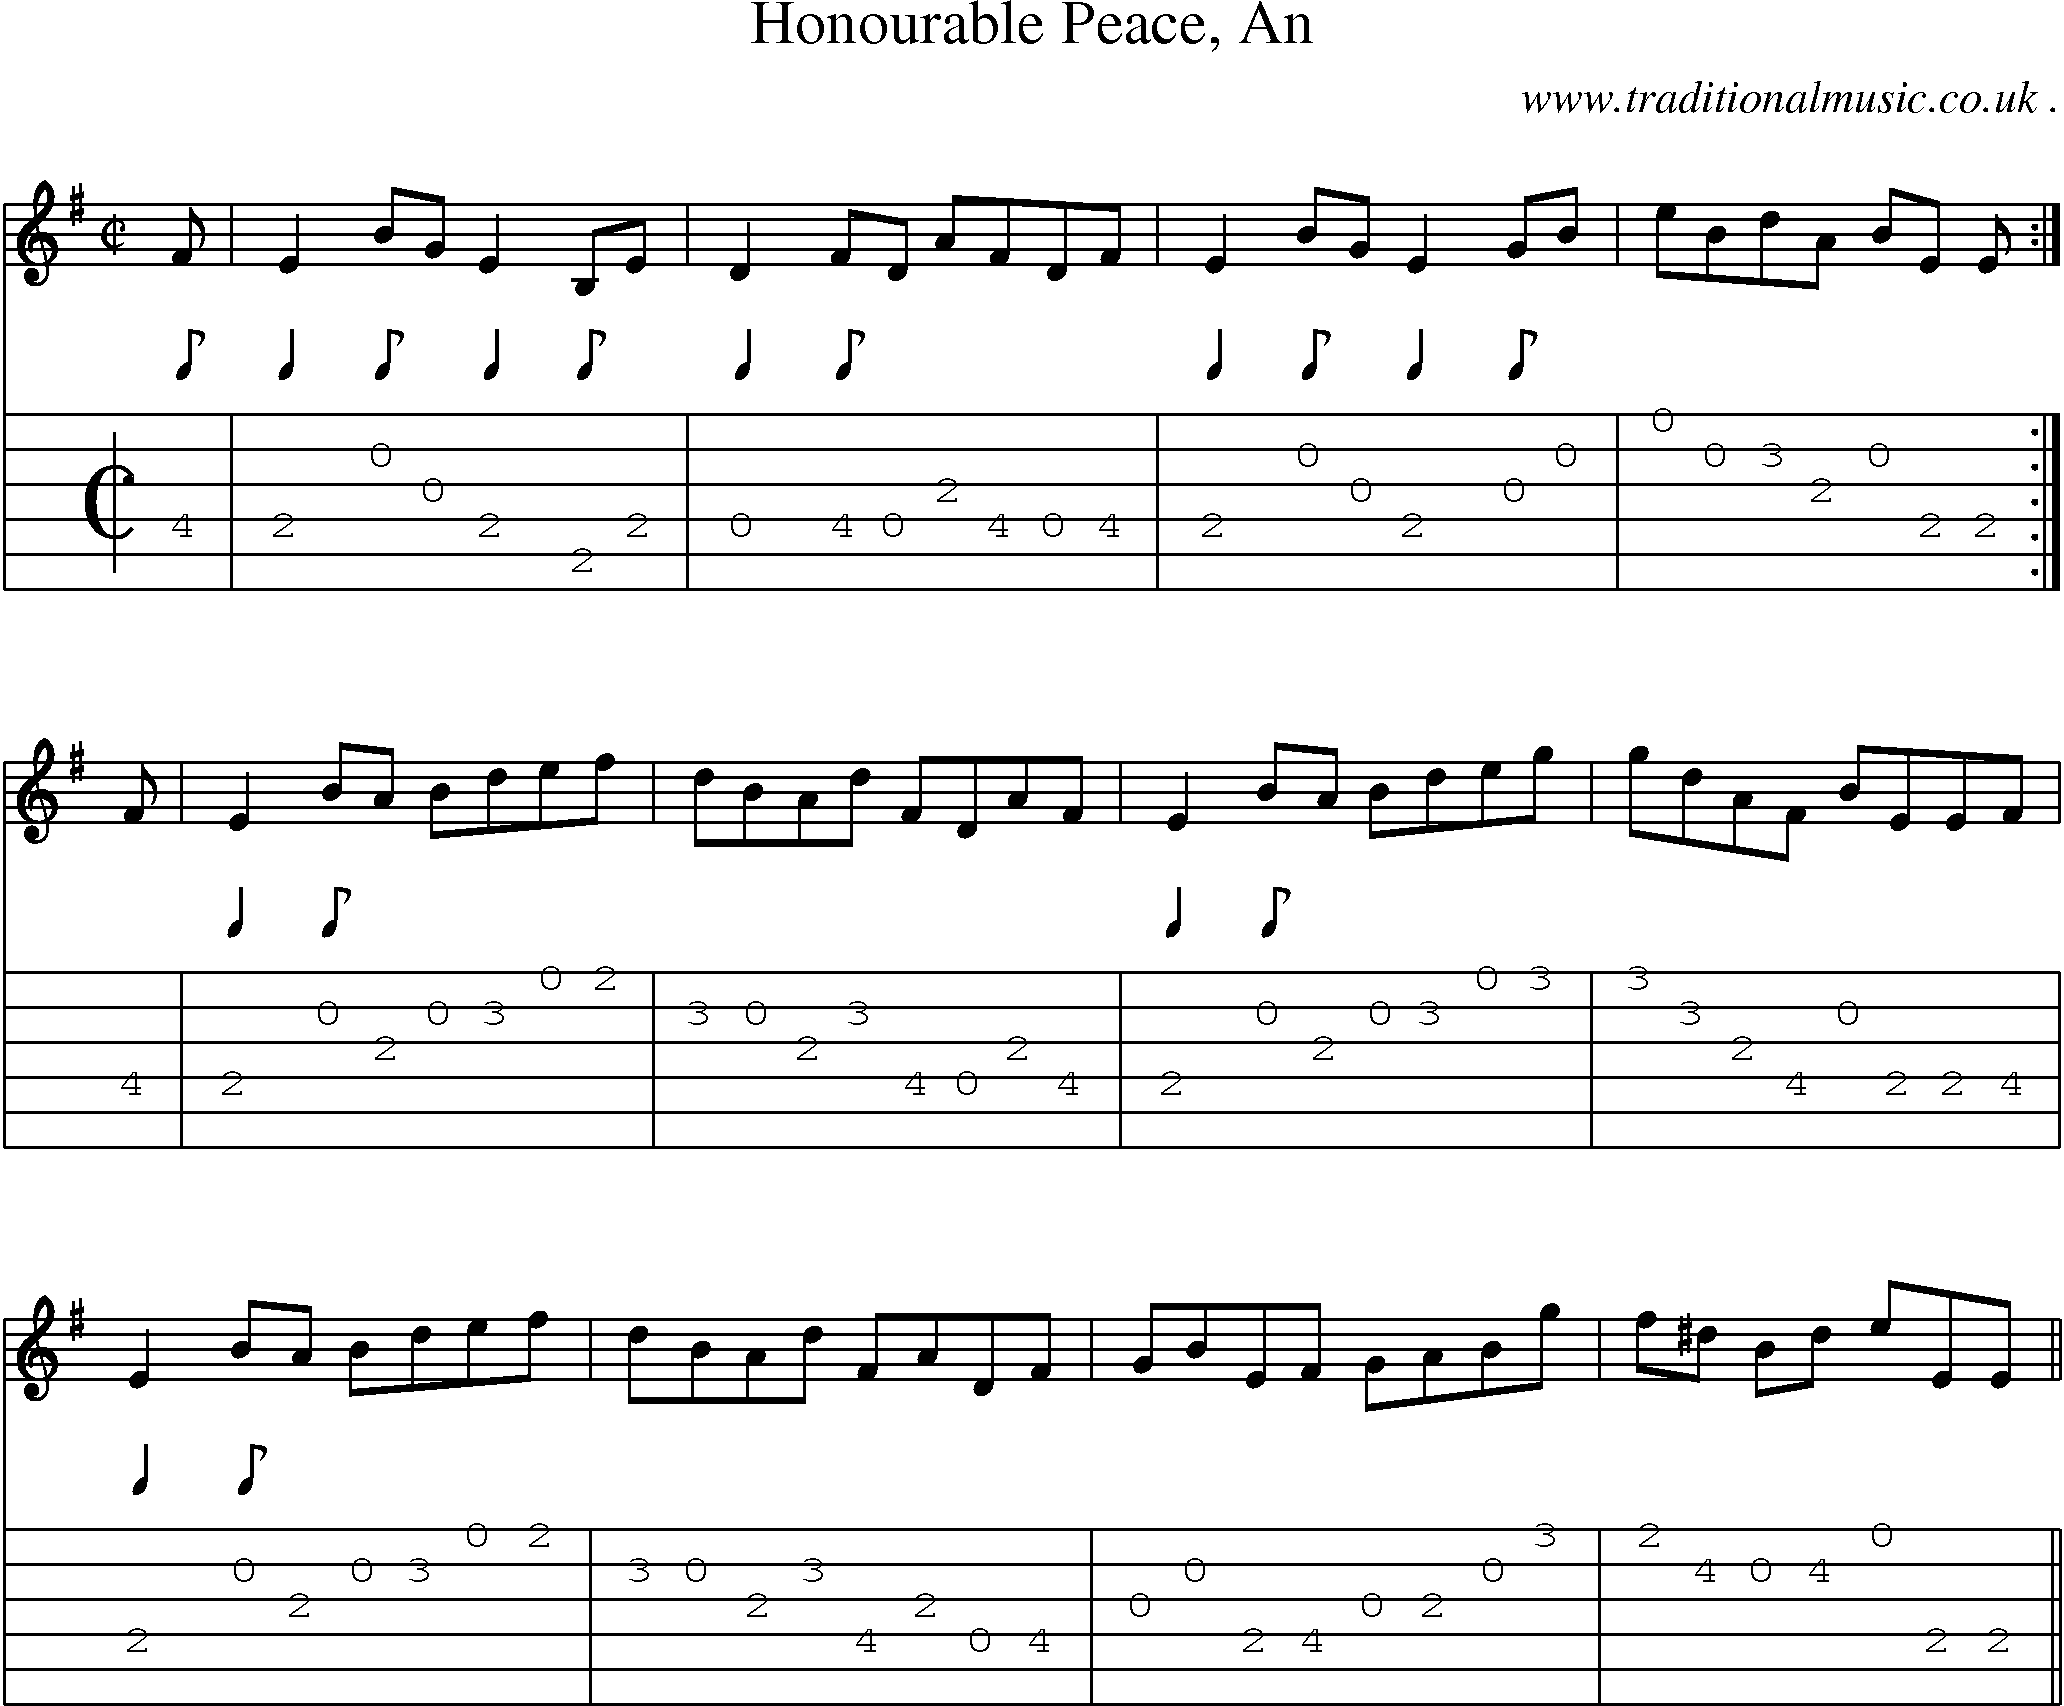 Sheet-music  score, Chords and Guitar Tabs for Honourable Peace An